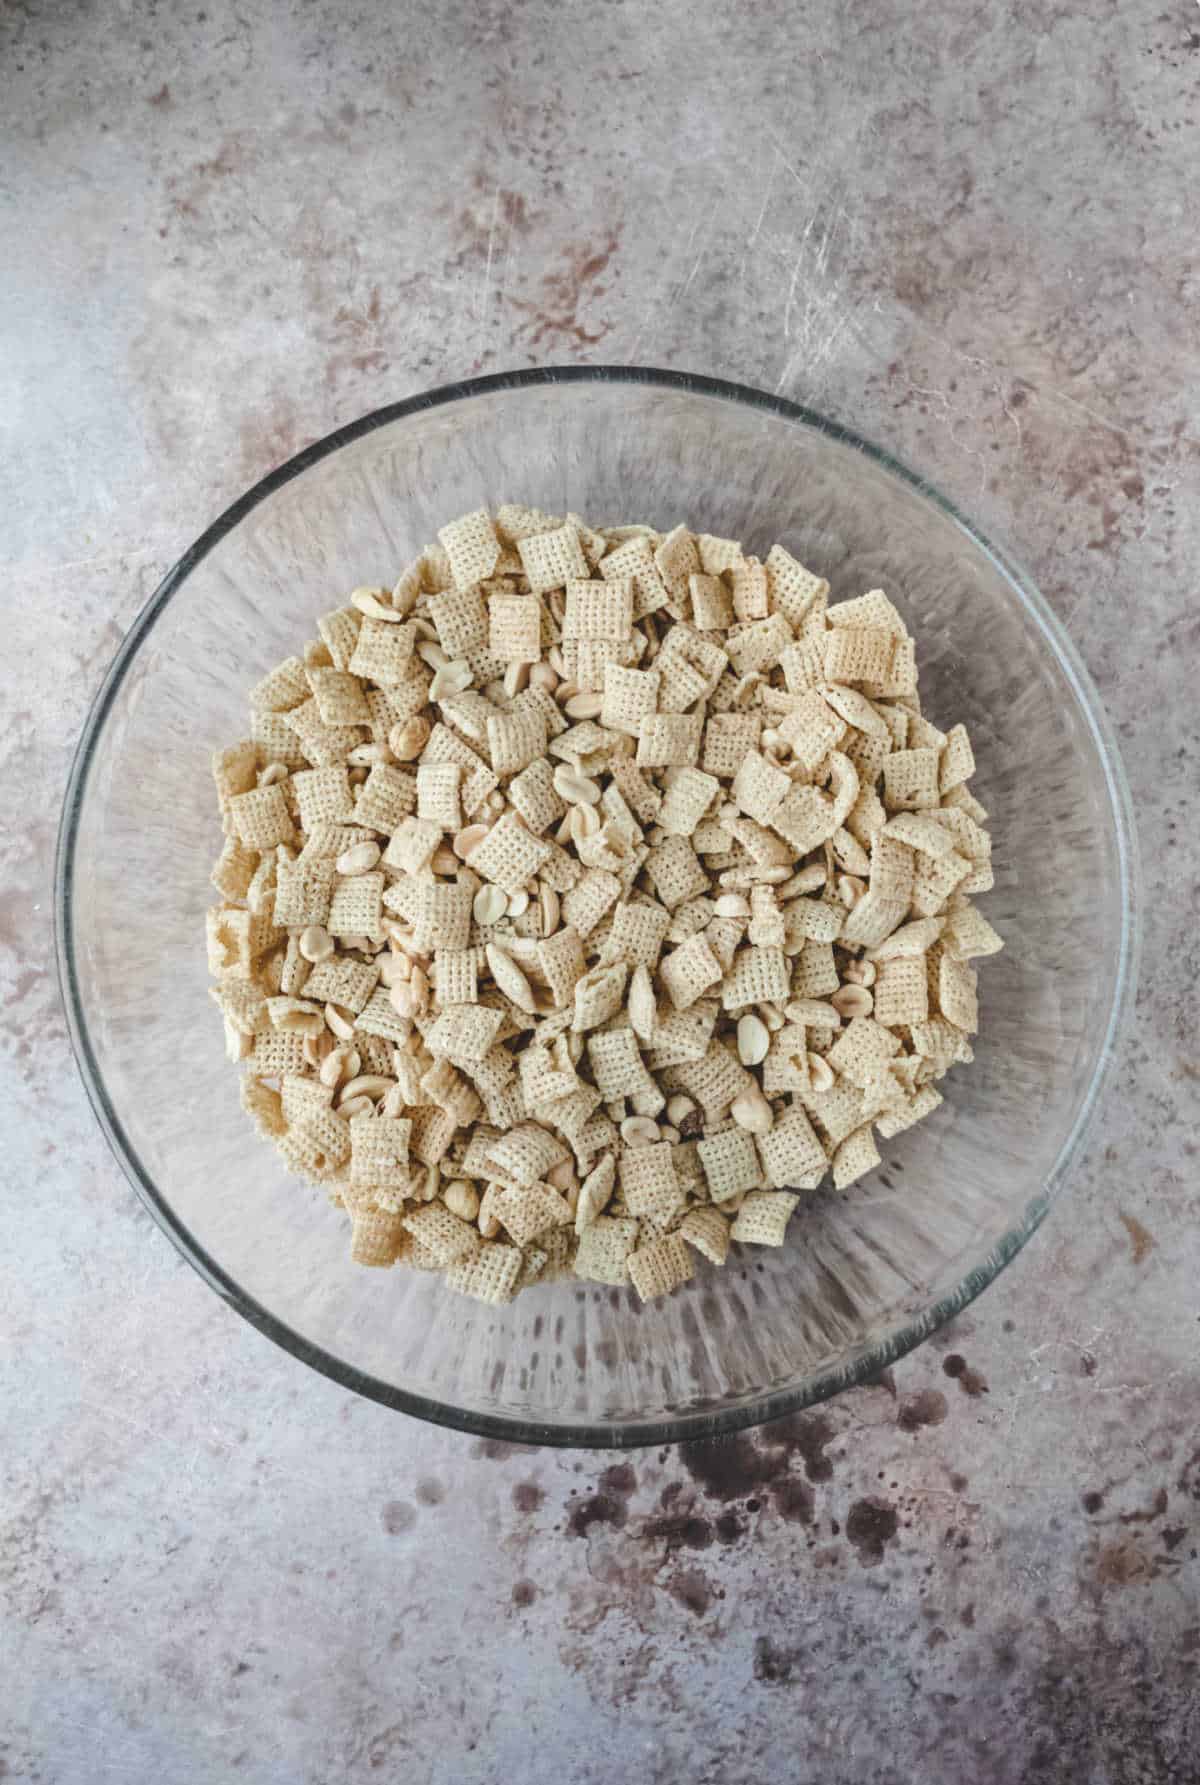 Chex cereal and peanuts in a glass mixing bowl.